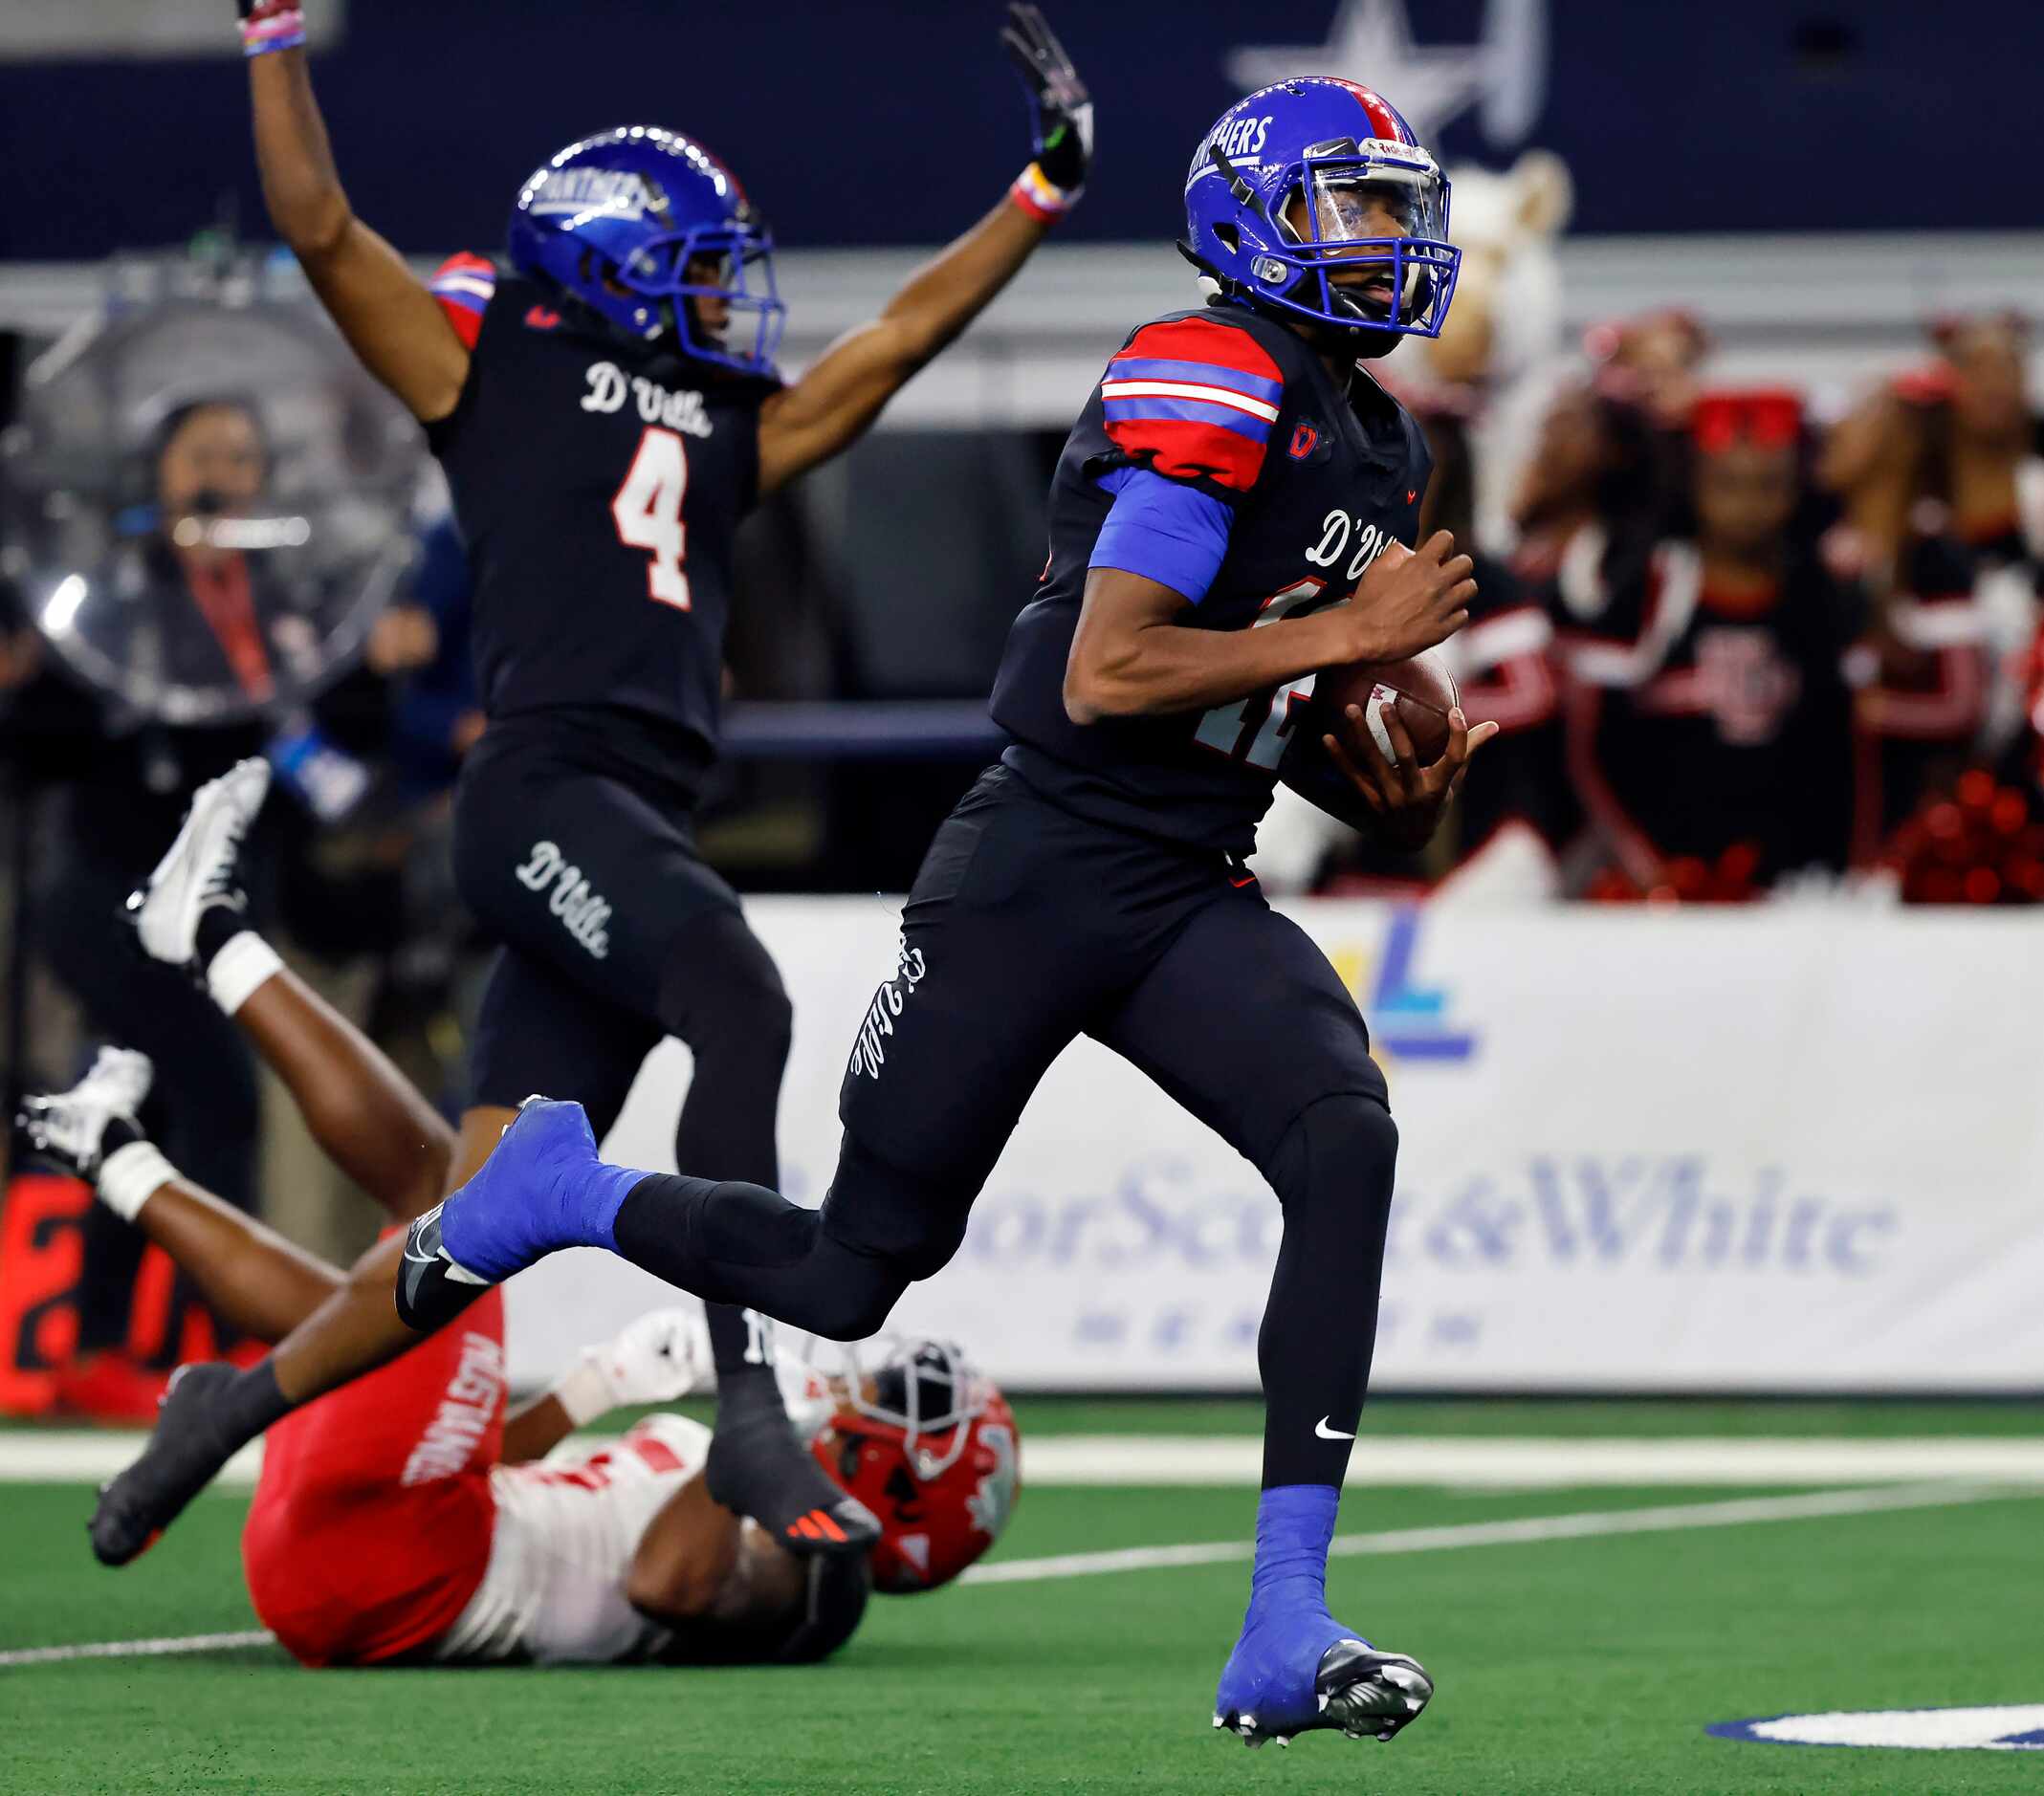 Duncanville quarterback Keelon Russell (12) cruises to a second quarter touchdown against...